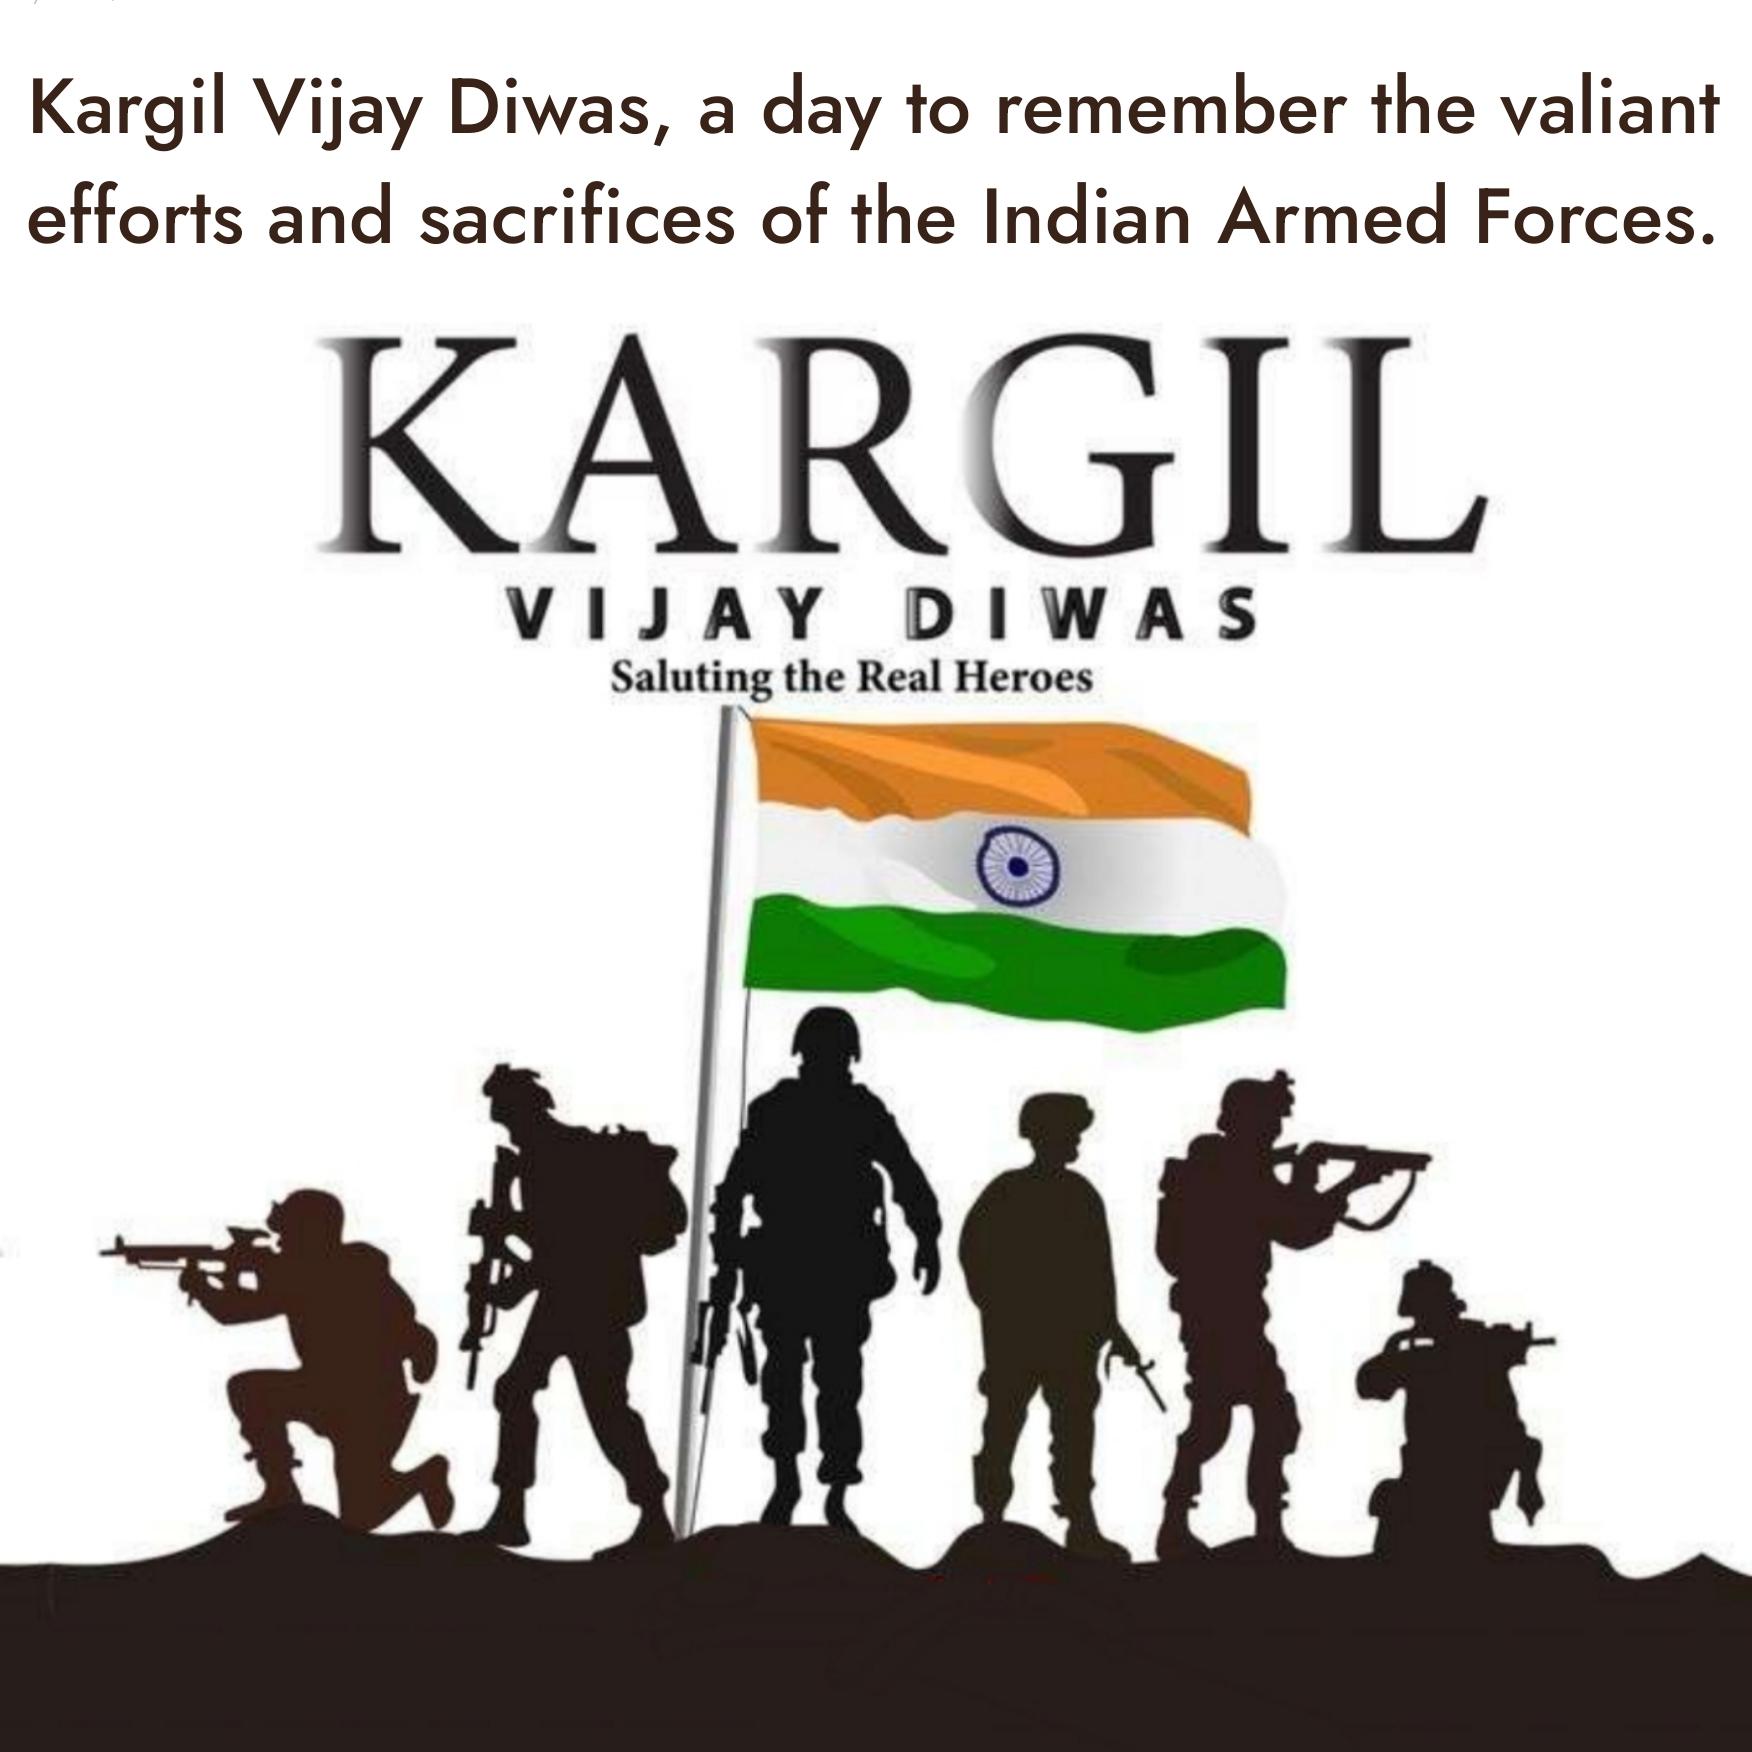 Kargil Vijay Diwas a day to remember the valiant efforts and sacrifices